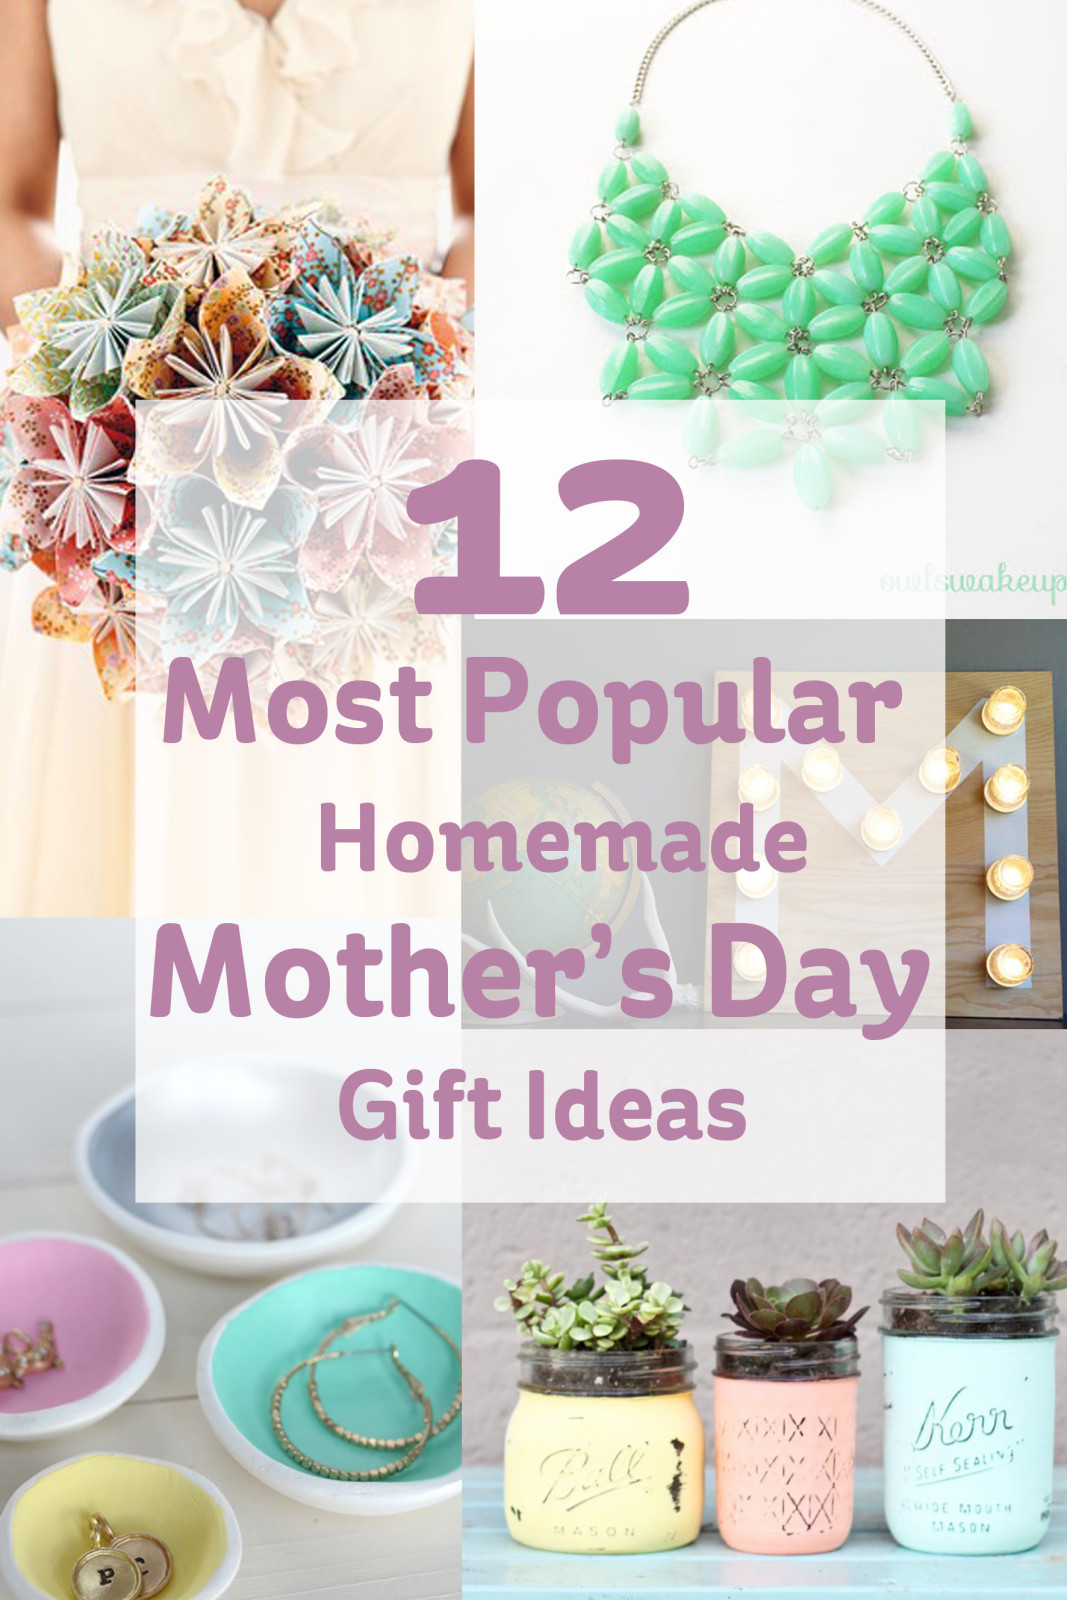 Mothers Day Homemade Gift Ideas
 12 Most Popular Homemade Mother s Day Gift Ideas